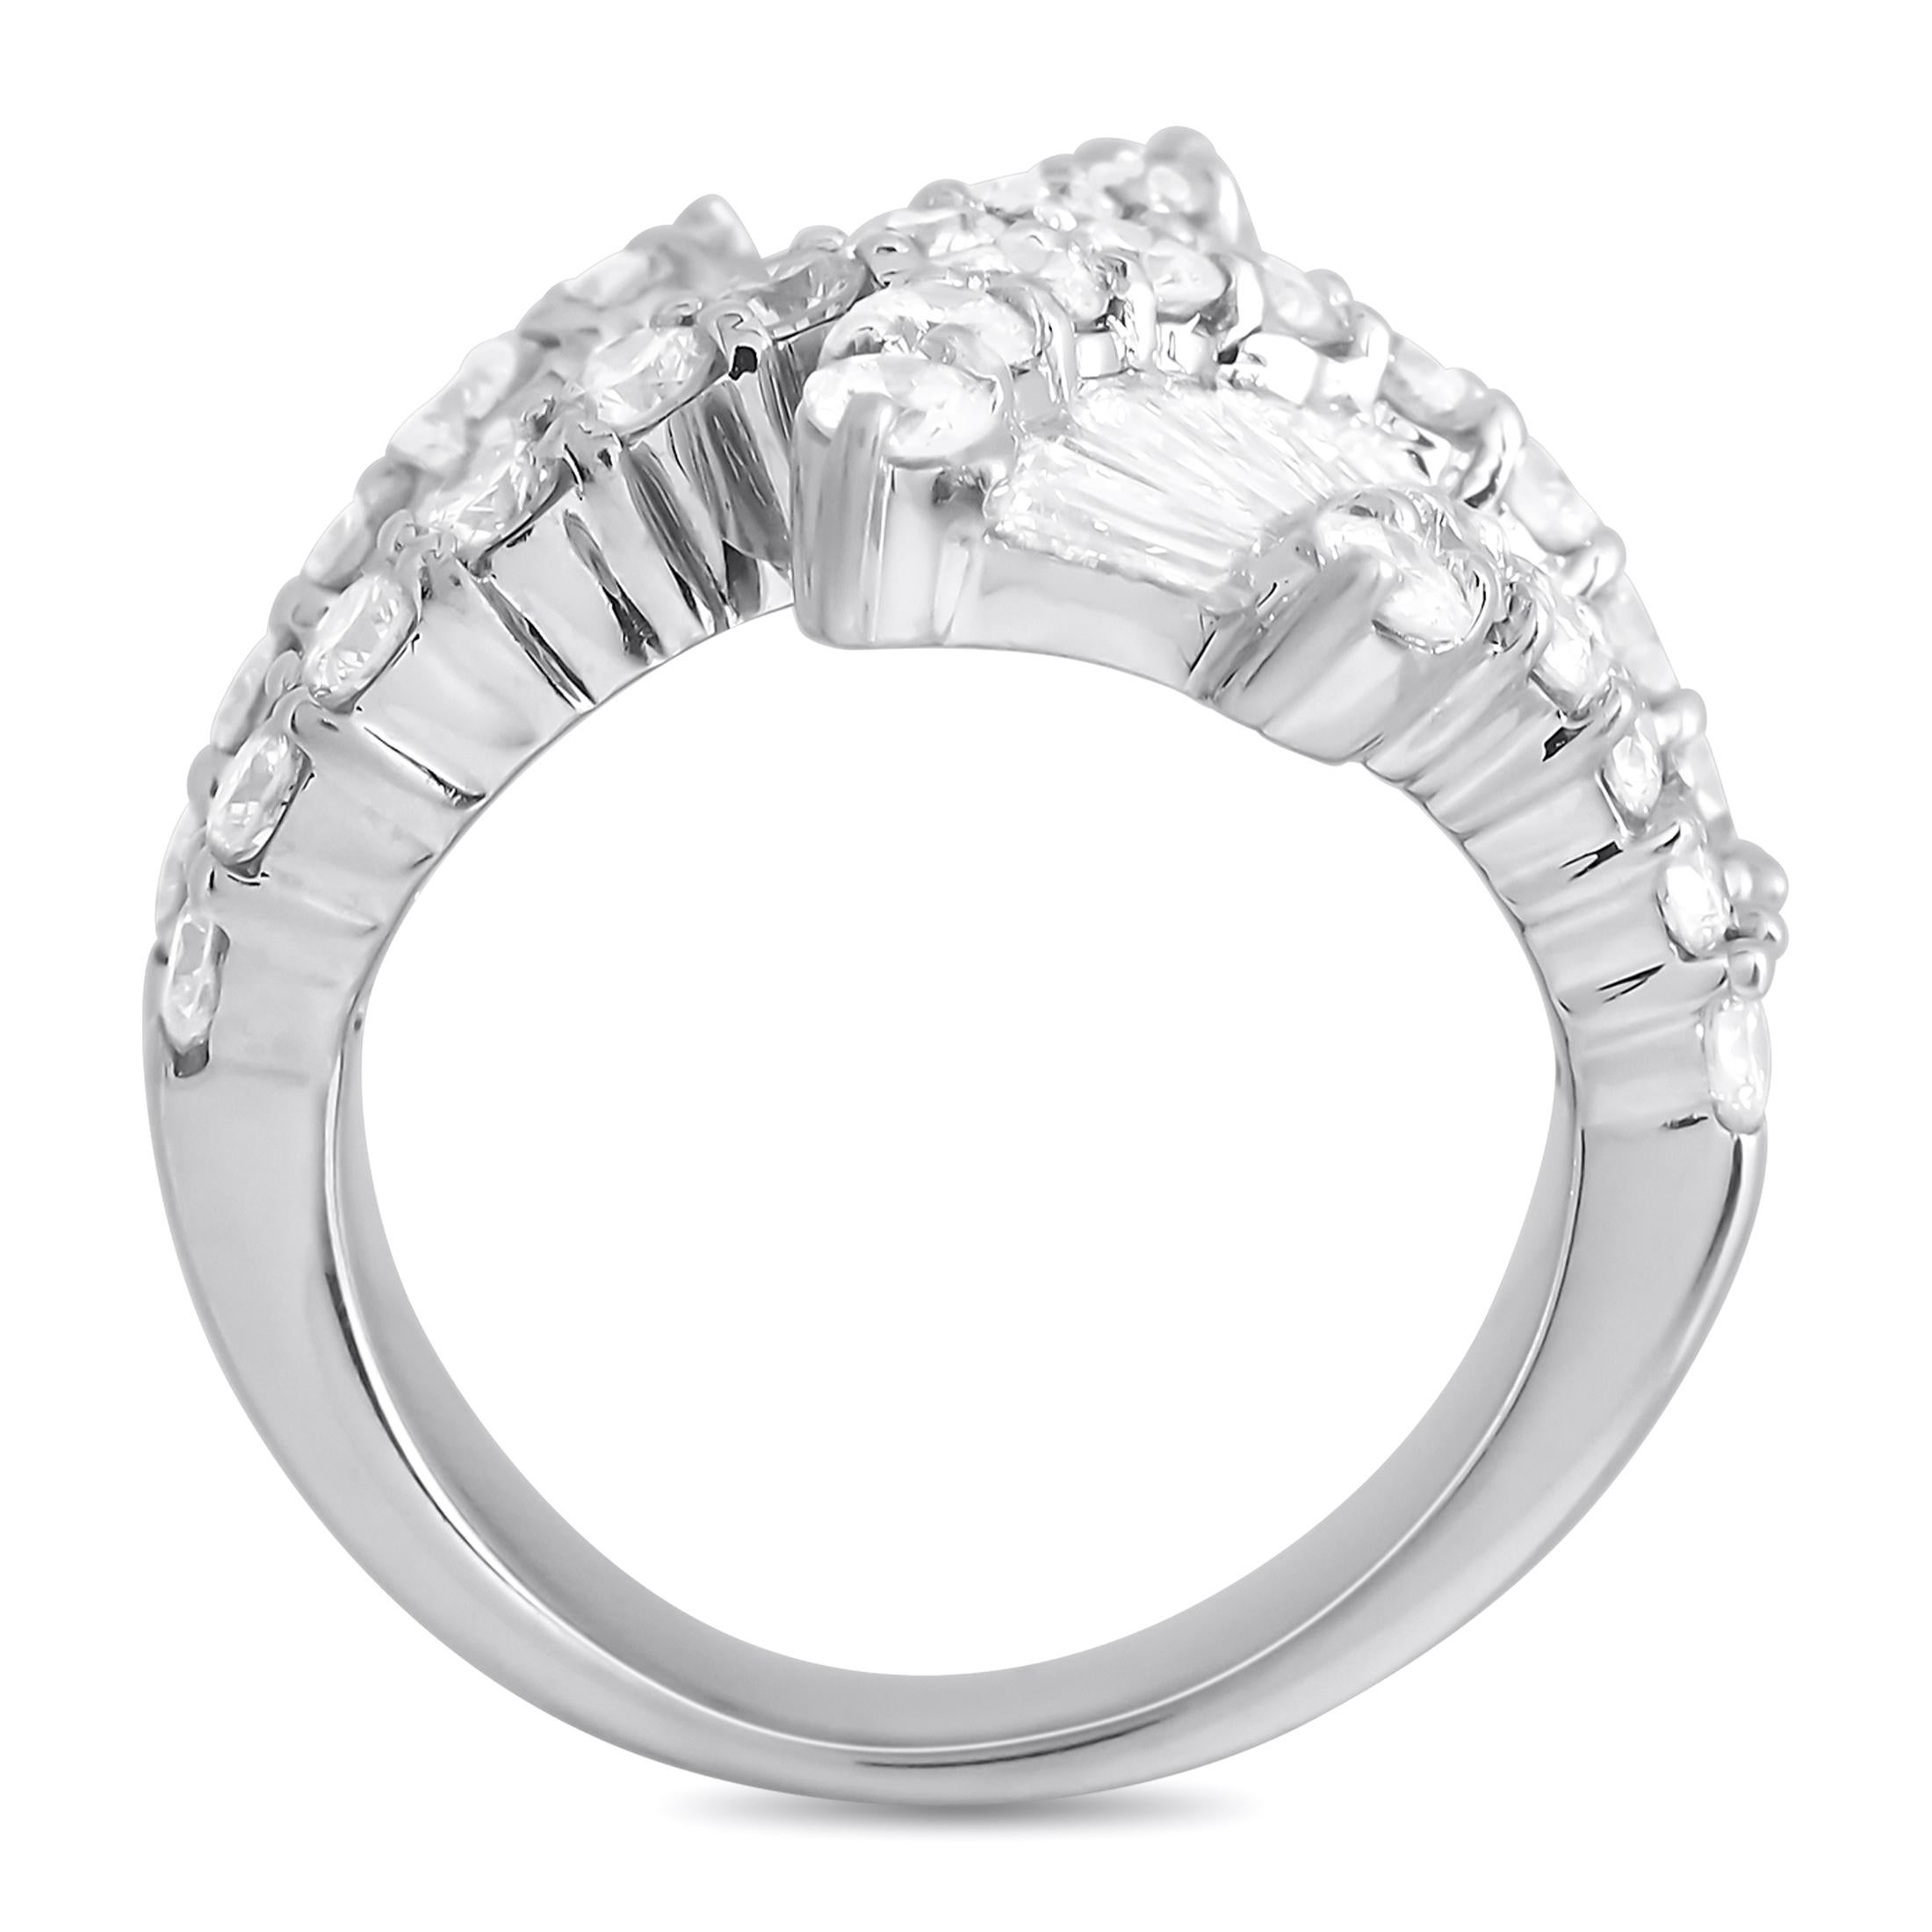 You just can't deny that this diamond ring bears a sophisticated look. The LB Exclusive 18K White Gold 2.50 ct Diamond Fan Bypass Ring features a semi-wide band at 5mm thick. It has an elegantly curving bypass design with a flared fan-like formation